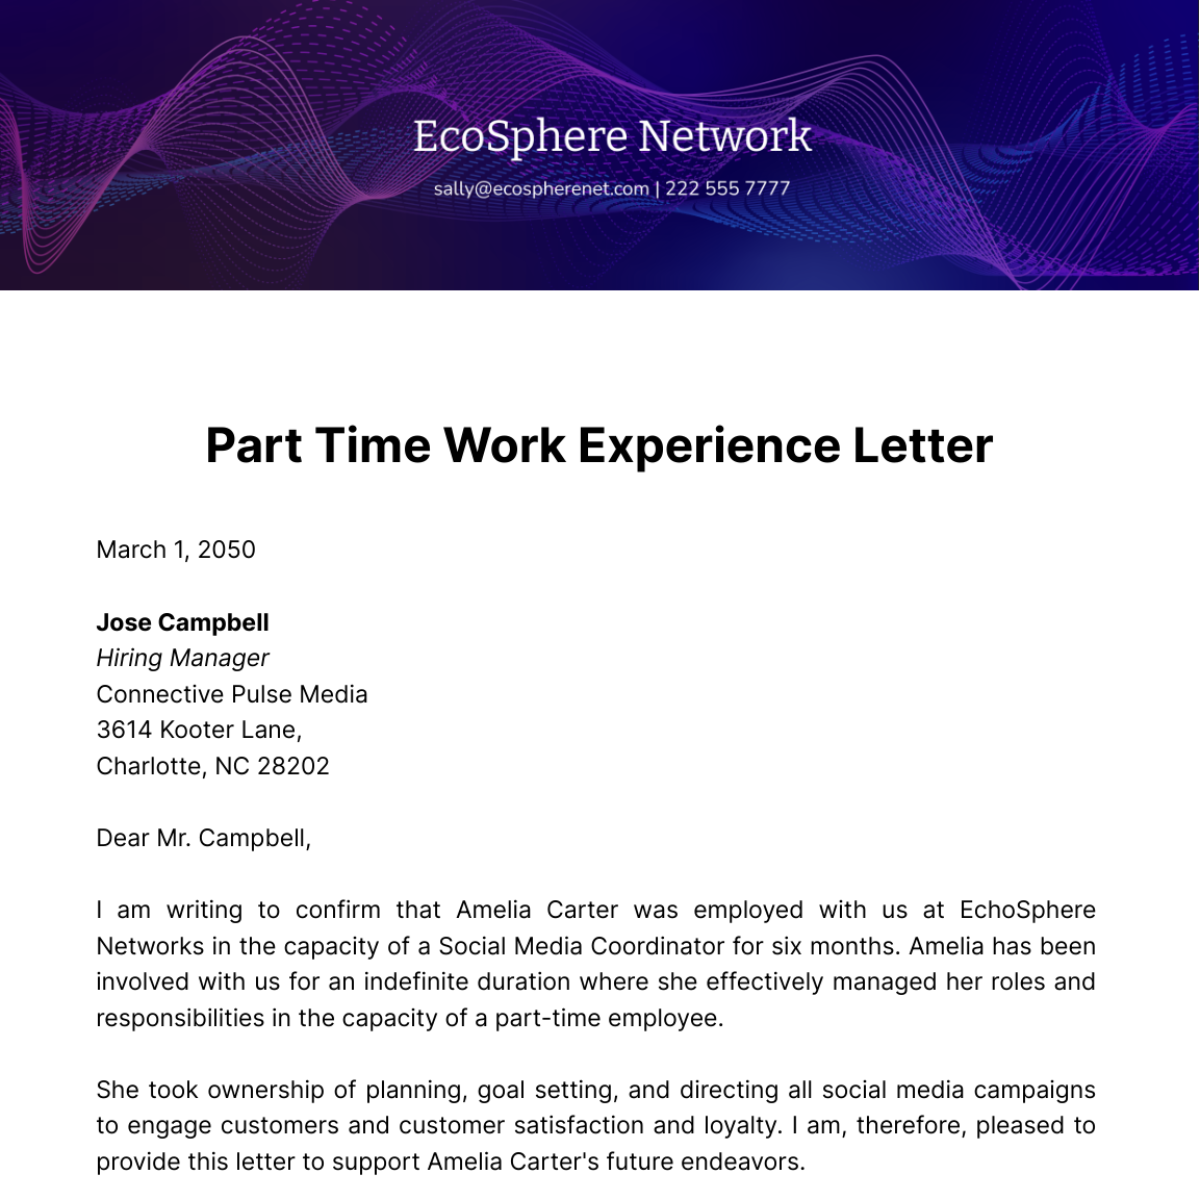 Part Time Work Experience Letter Template